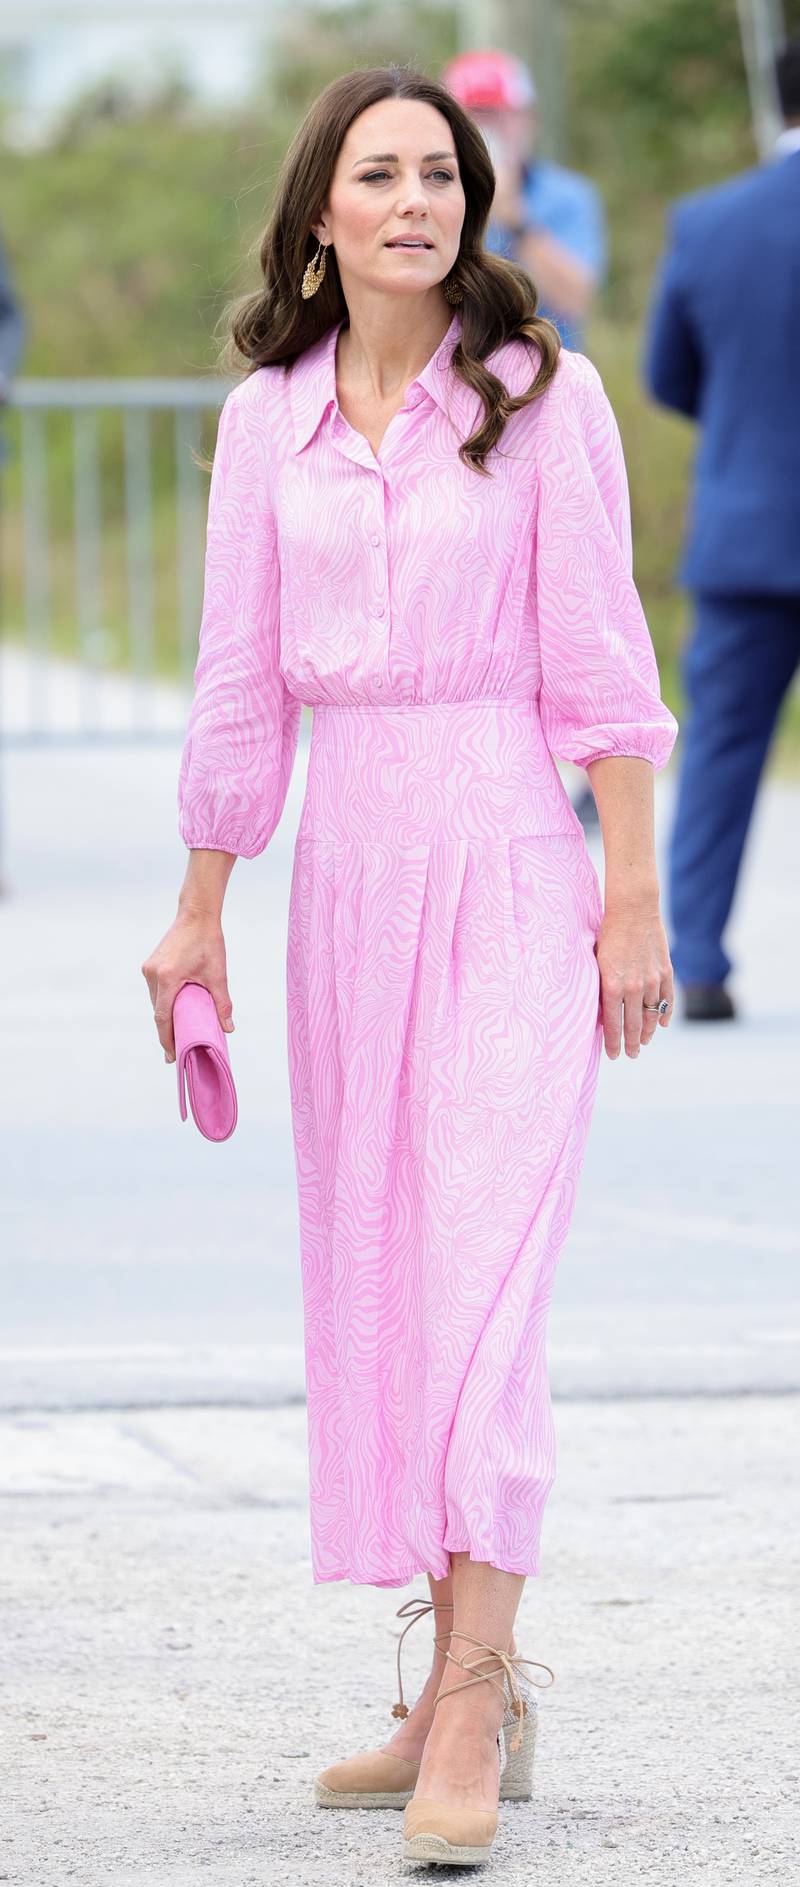 The Duchess of Cambridge, in a pink Rixo dress, visits Daystar Evangelical Church Abaco in The Bahamas on March 26. PA 